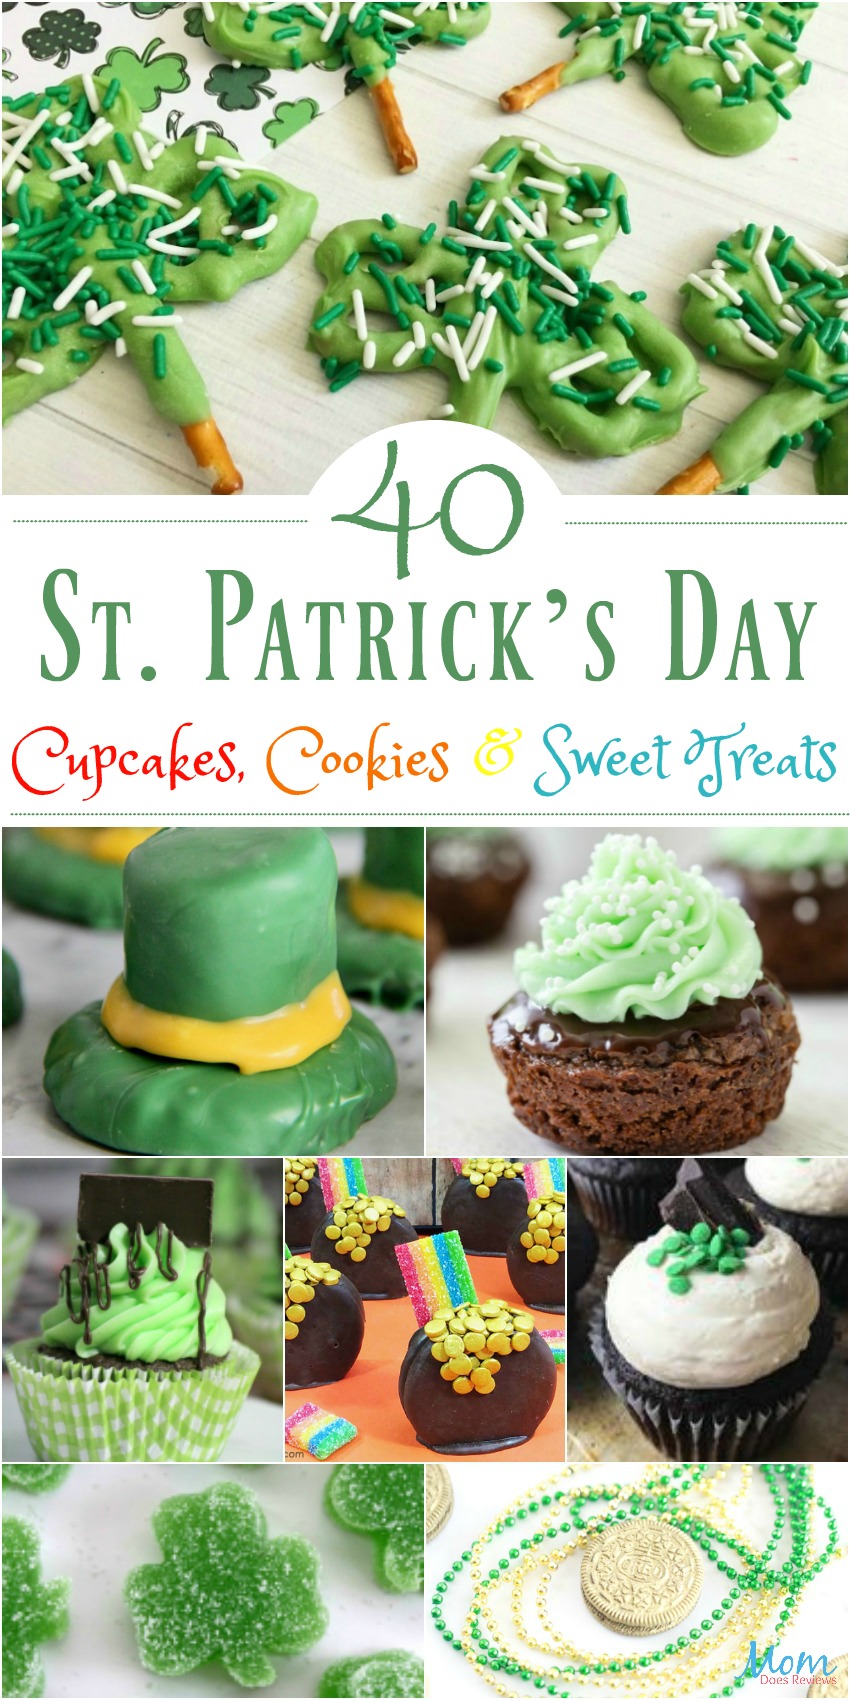 40 St. Patrick’s Day Cupcakes, Cookies & Sweet Treats for a Fun Celebration #cupcakes #cookies #sweets #stpattysday #stpatricksday